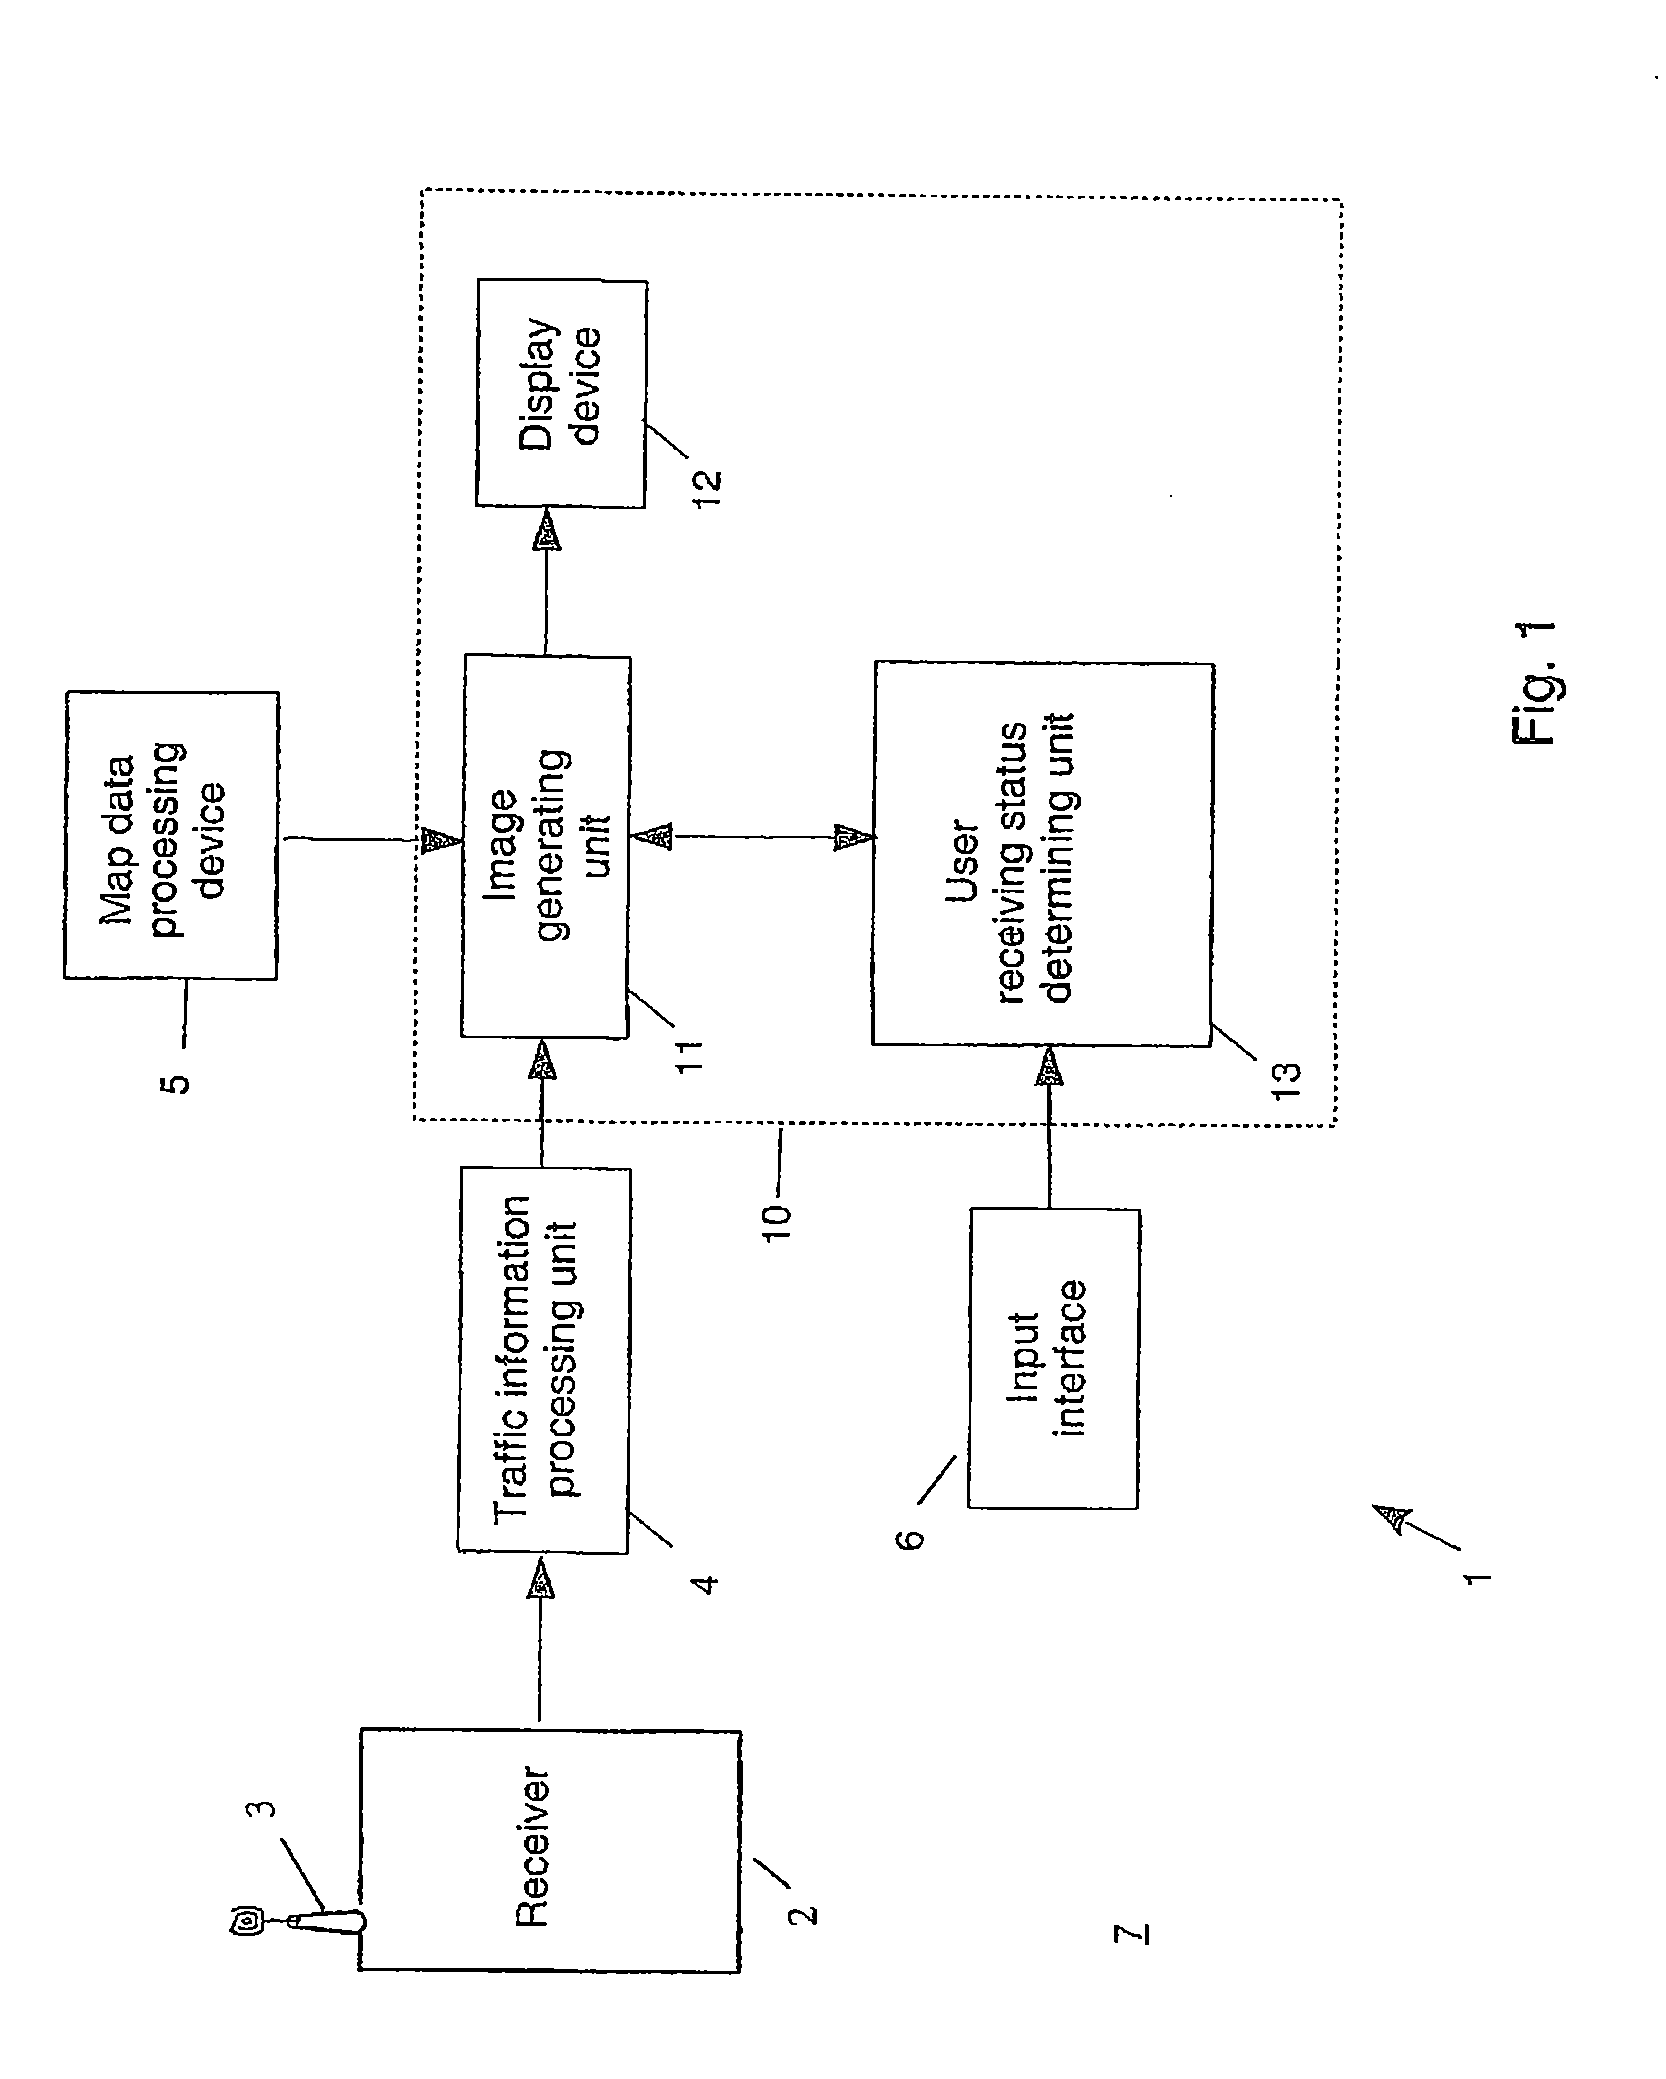 Traffic information display system and method of displaying traffic information on a display device